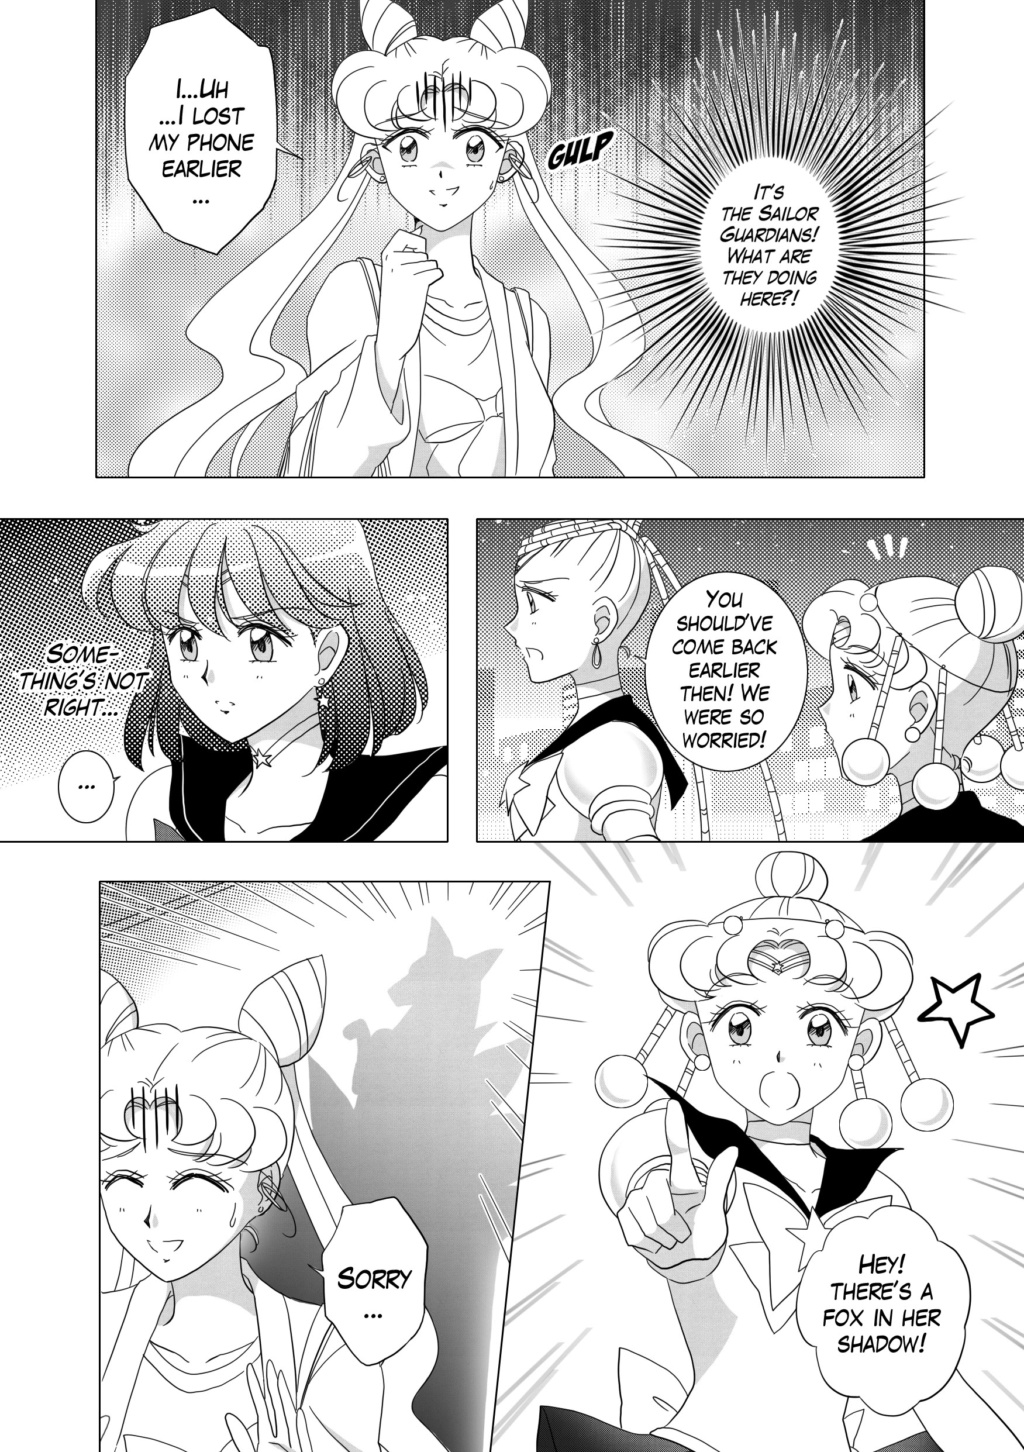 [F] My 30th century Chibi-Usa x Helios doujinshi project: UPDATED 11-25-18 - Page 19 Sbs_pg20